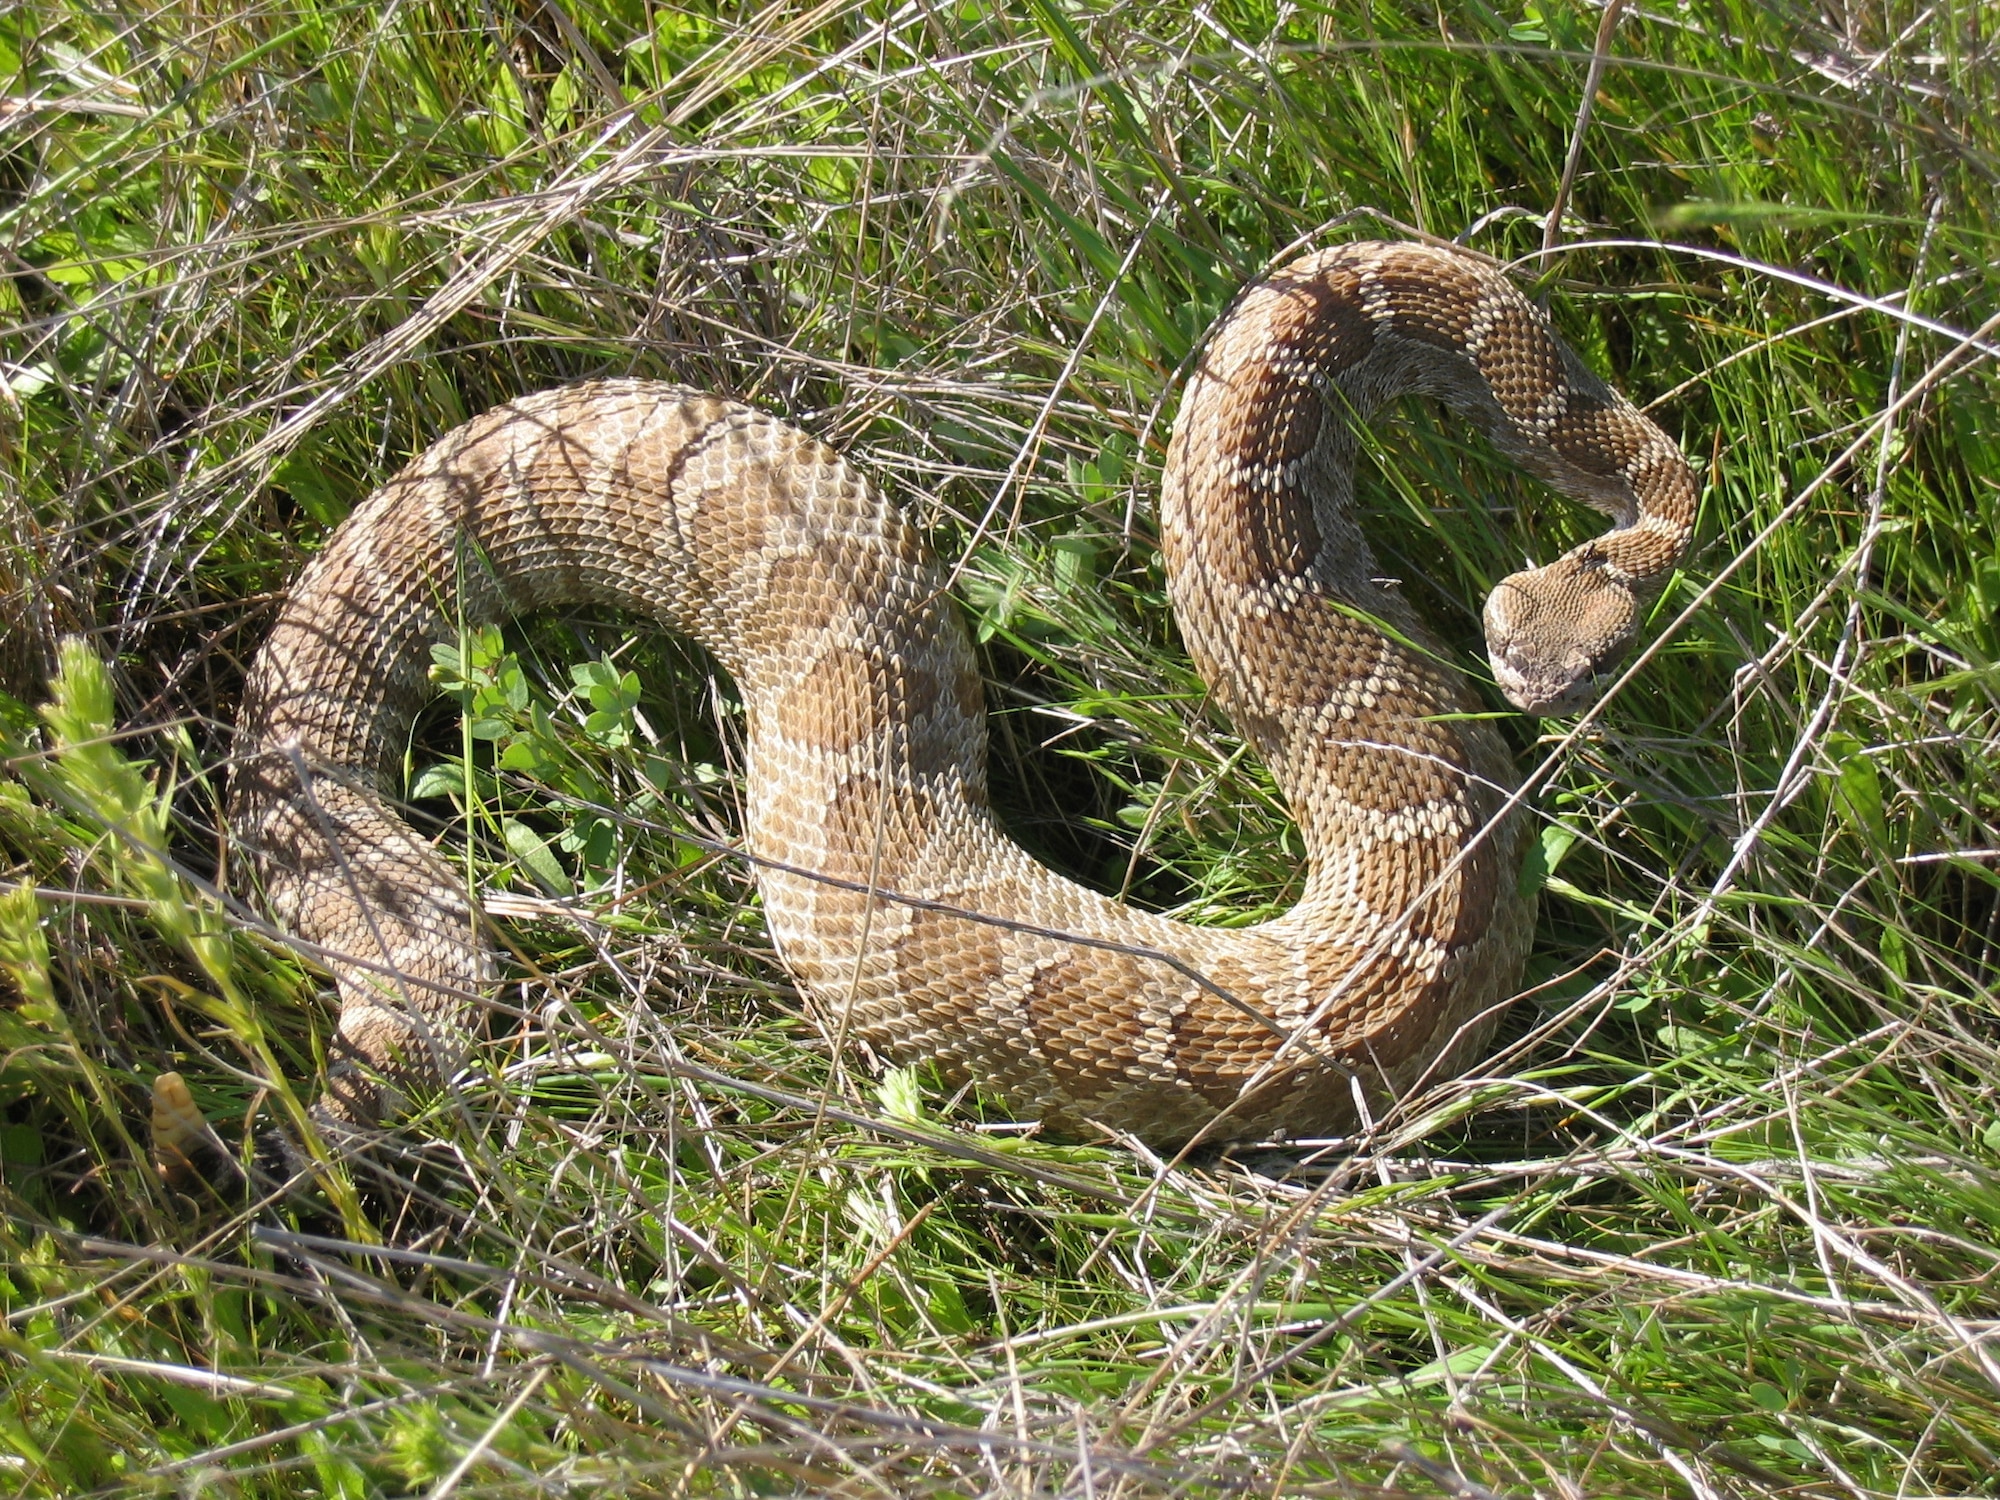 A rattlesnake slithers in the grass at Beale Air Force Base, California. Rattlesnakes are one of the species of snakes found in California. (Courtesy photo by Bruce S. Reinhardt)